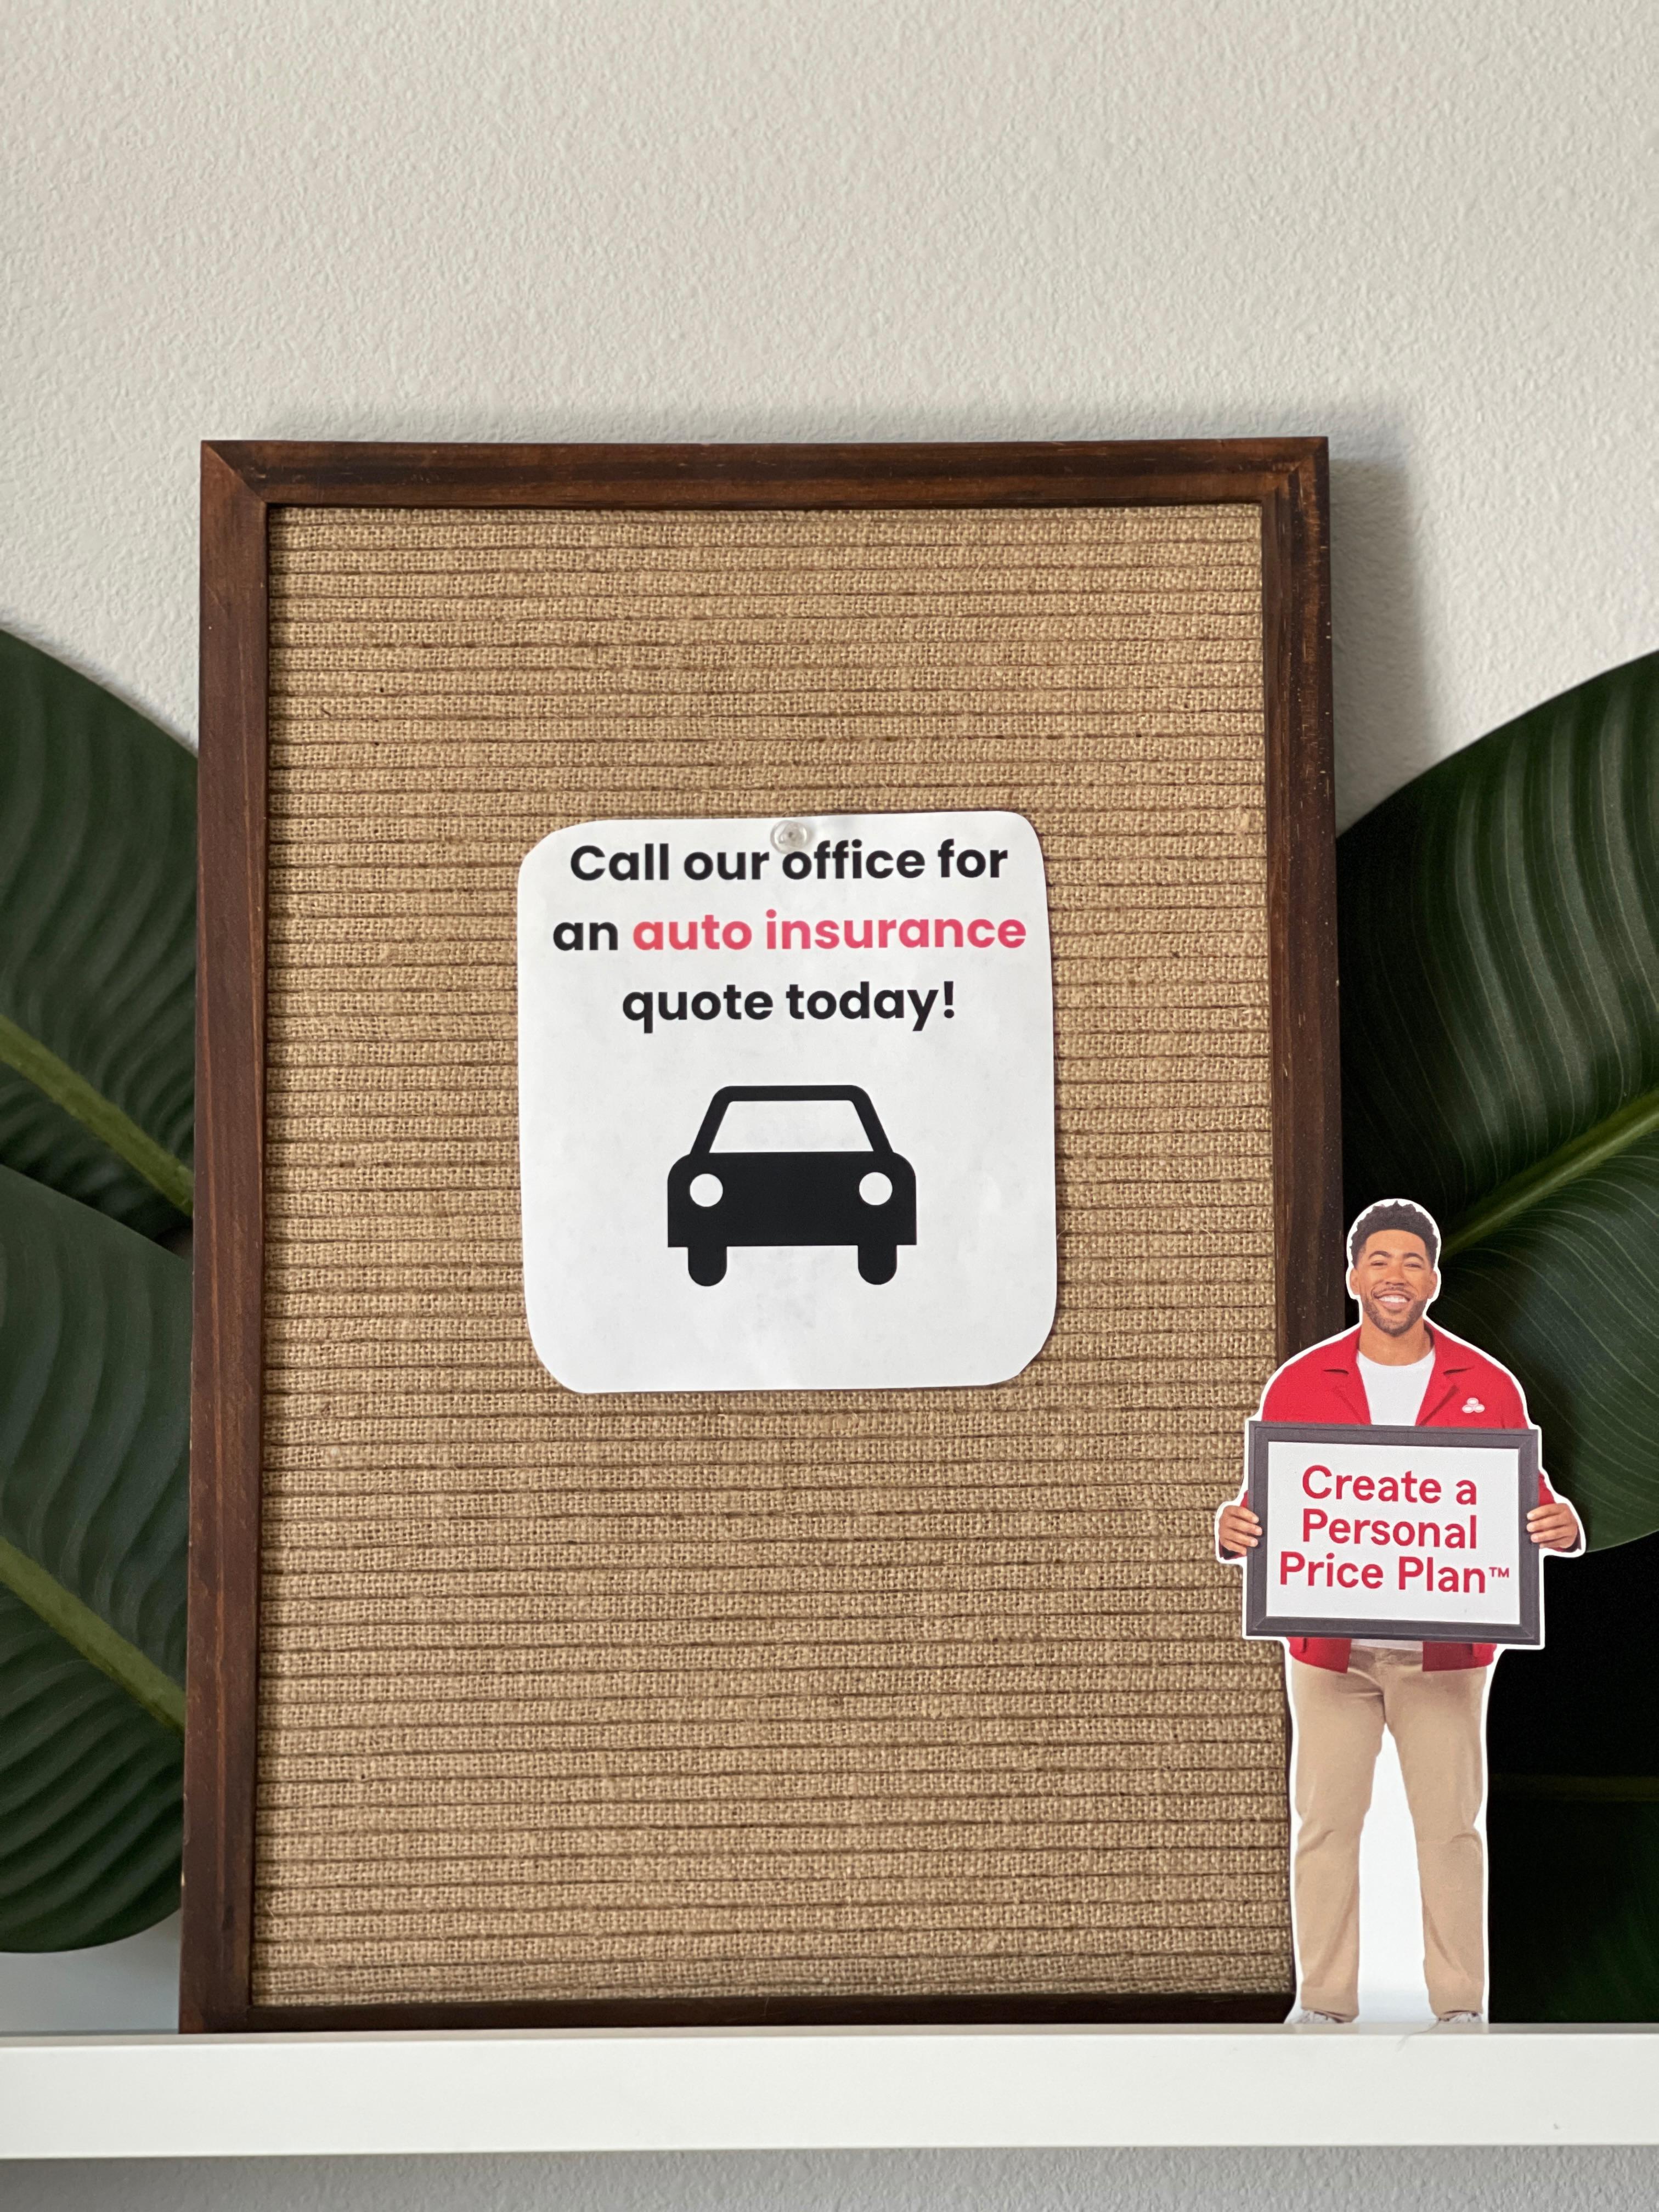 Call our office for a free car insurance quote!